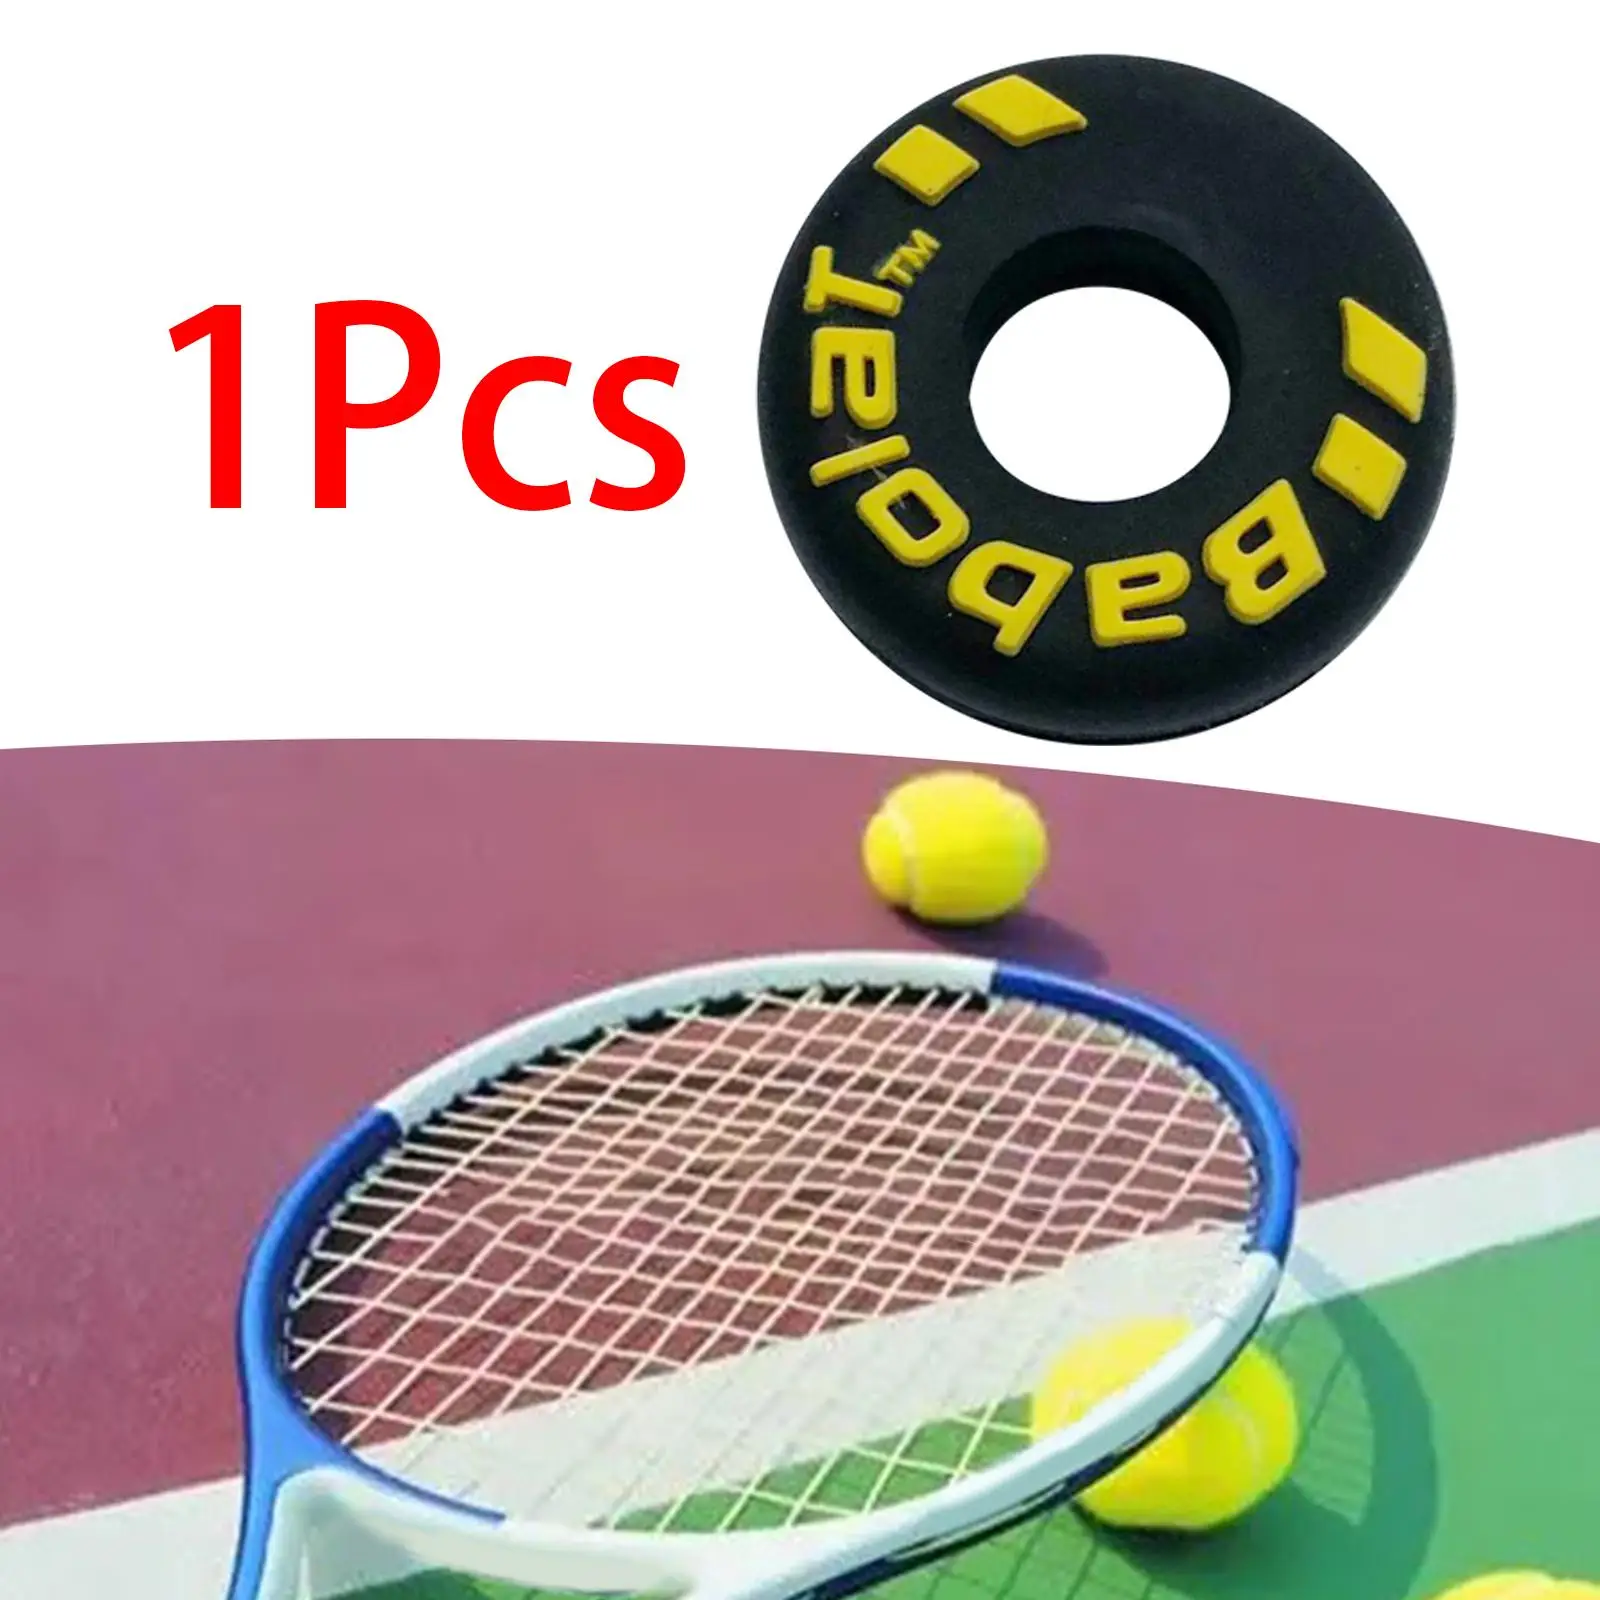 2xTennis Racket Vibration Dampener Players for Keeping Stability Outdoor Black